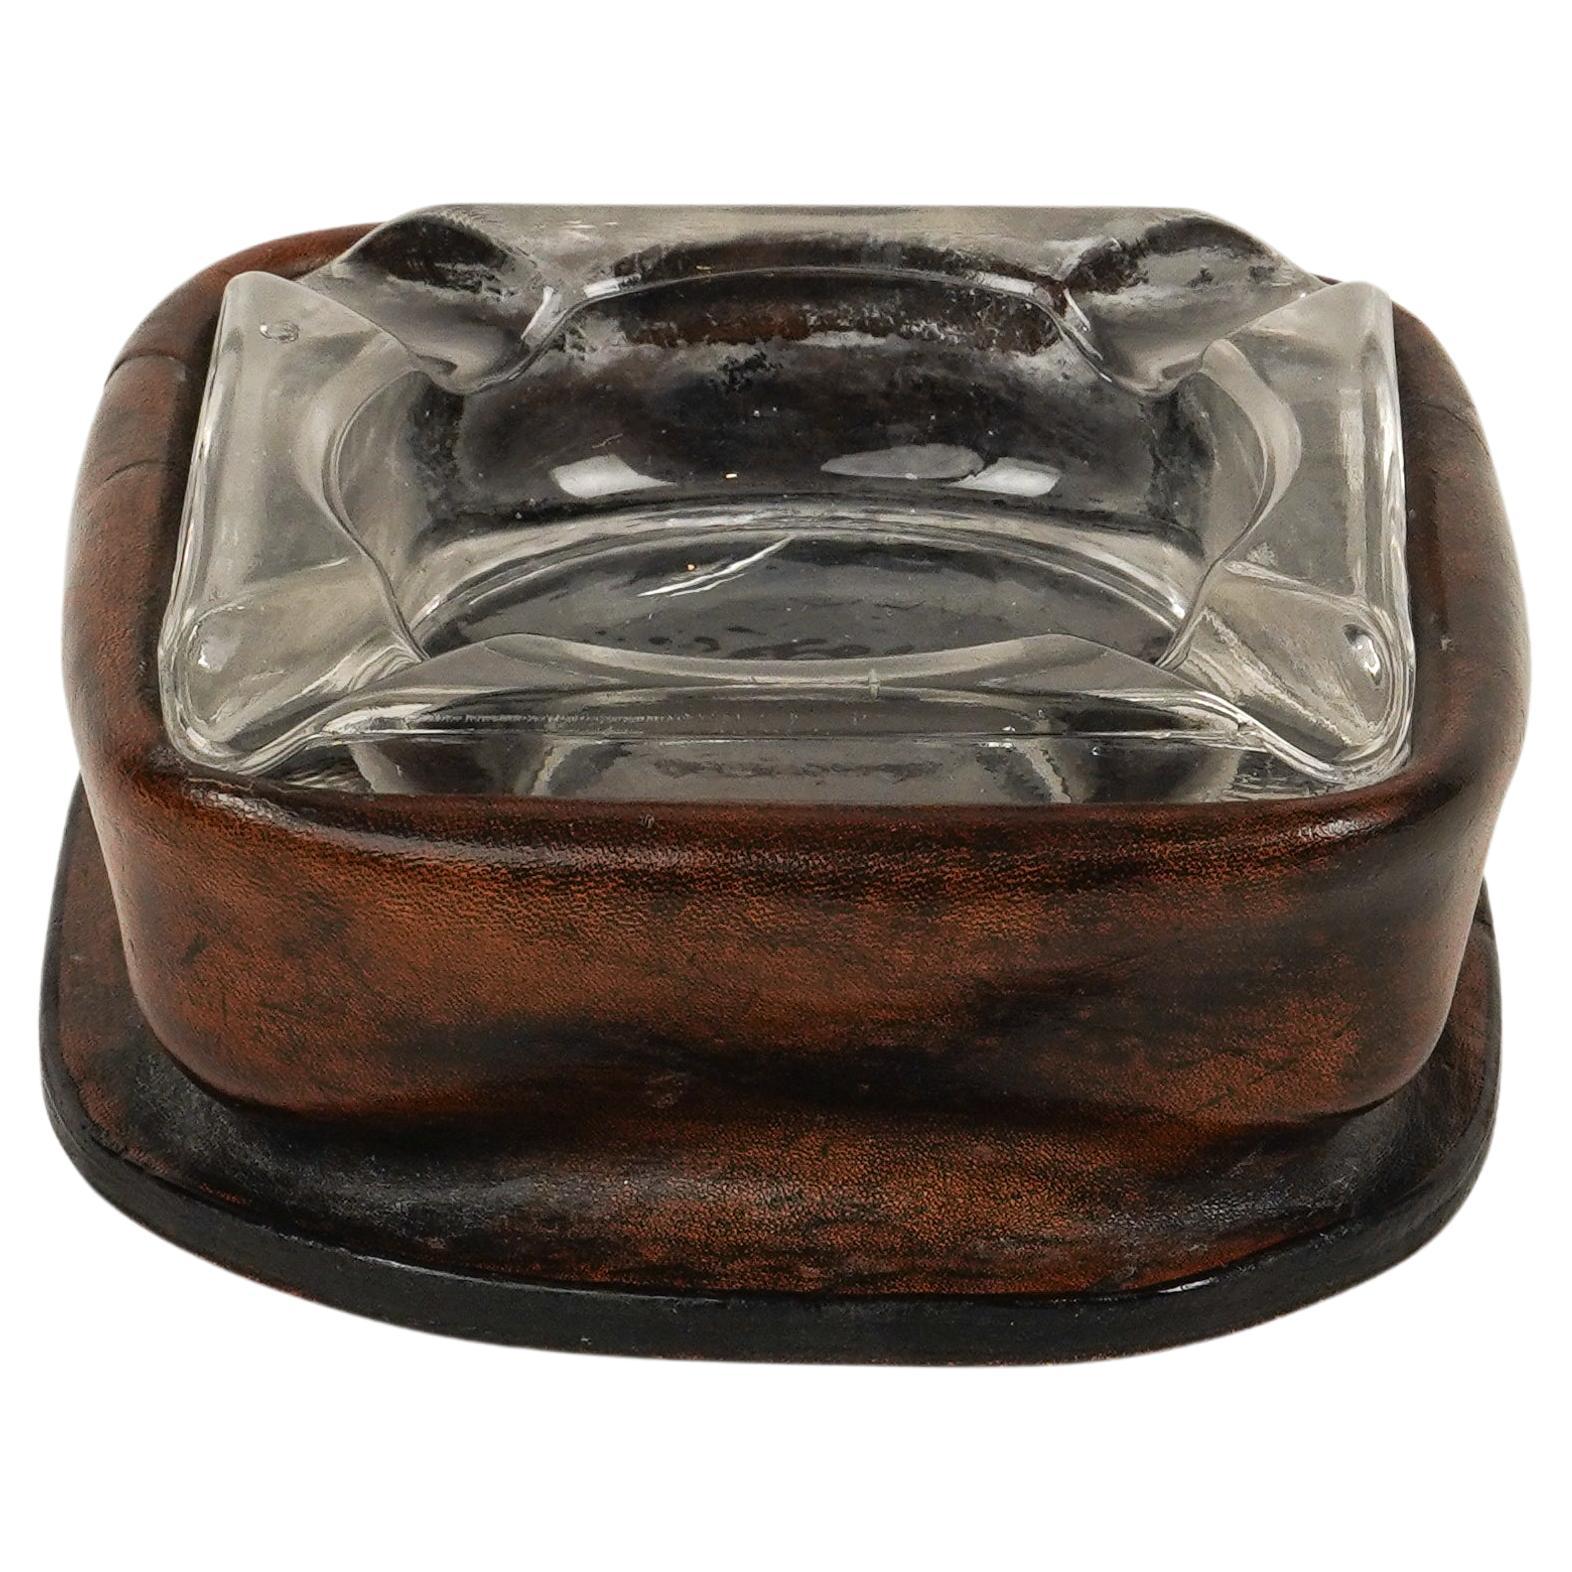 Midcentury amazing squared ashtray in brown leather and glass in the style of Jacques Adnet.

Made in Italy in the 1960s.

Perfect desk object or gift idea.